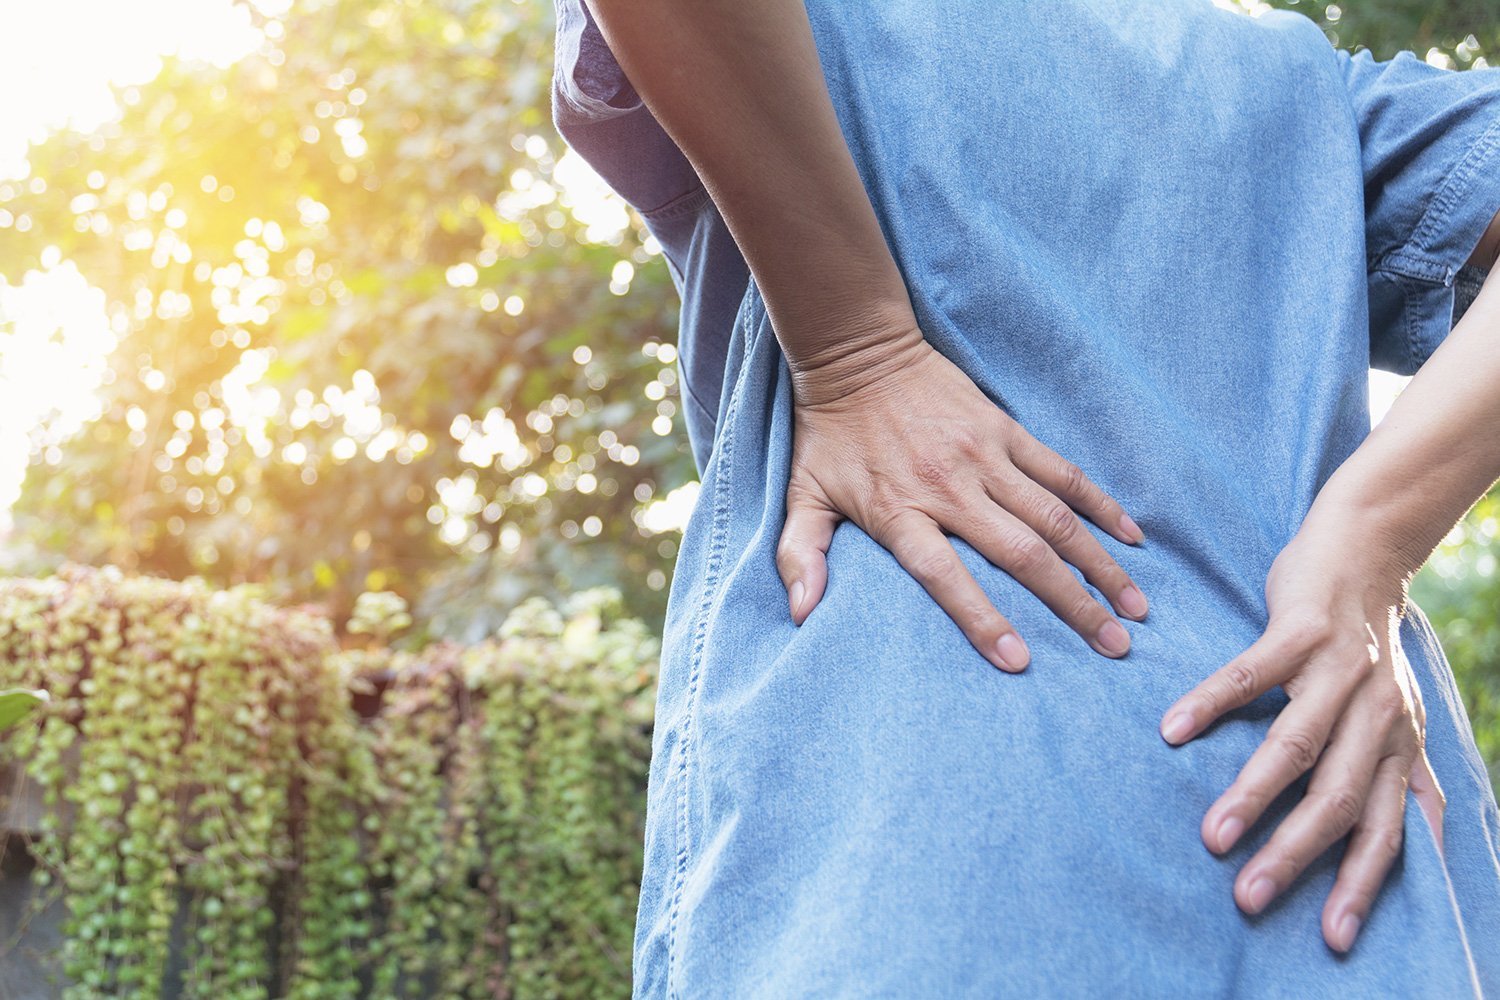 When Back Pain Means Kidney Problems